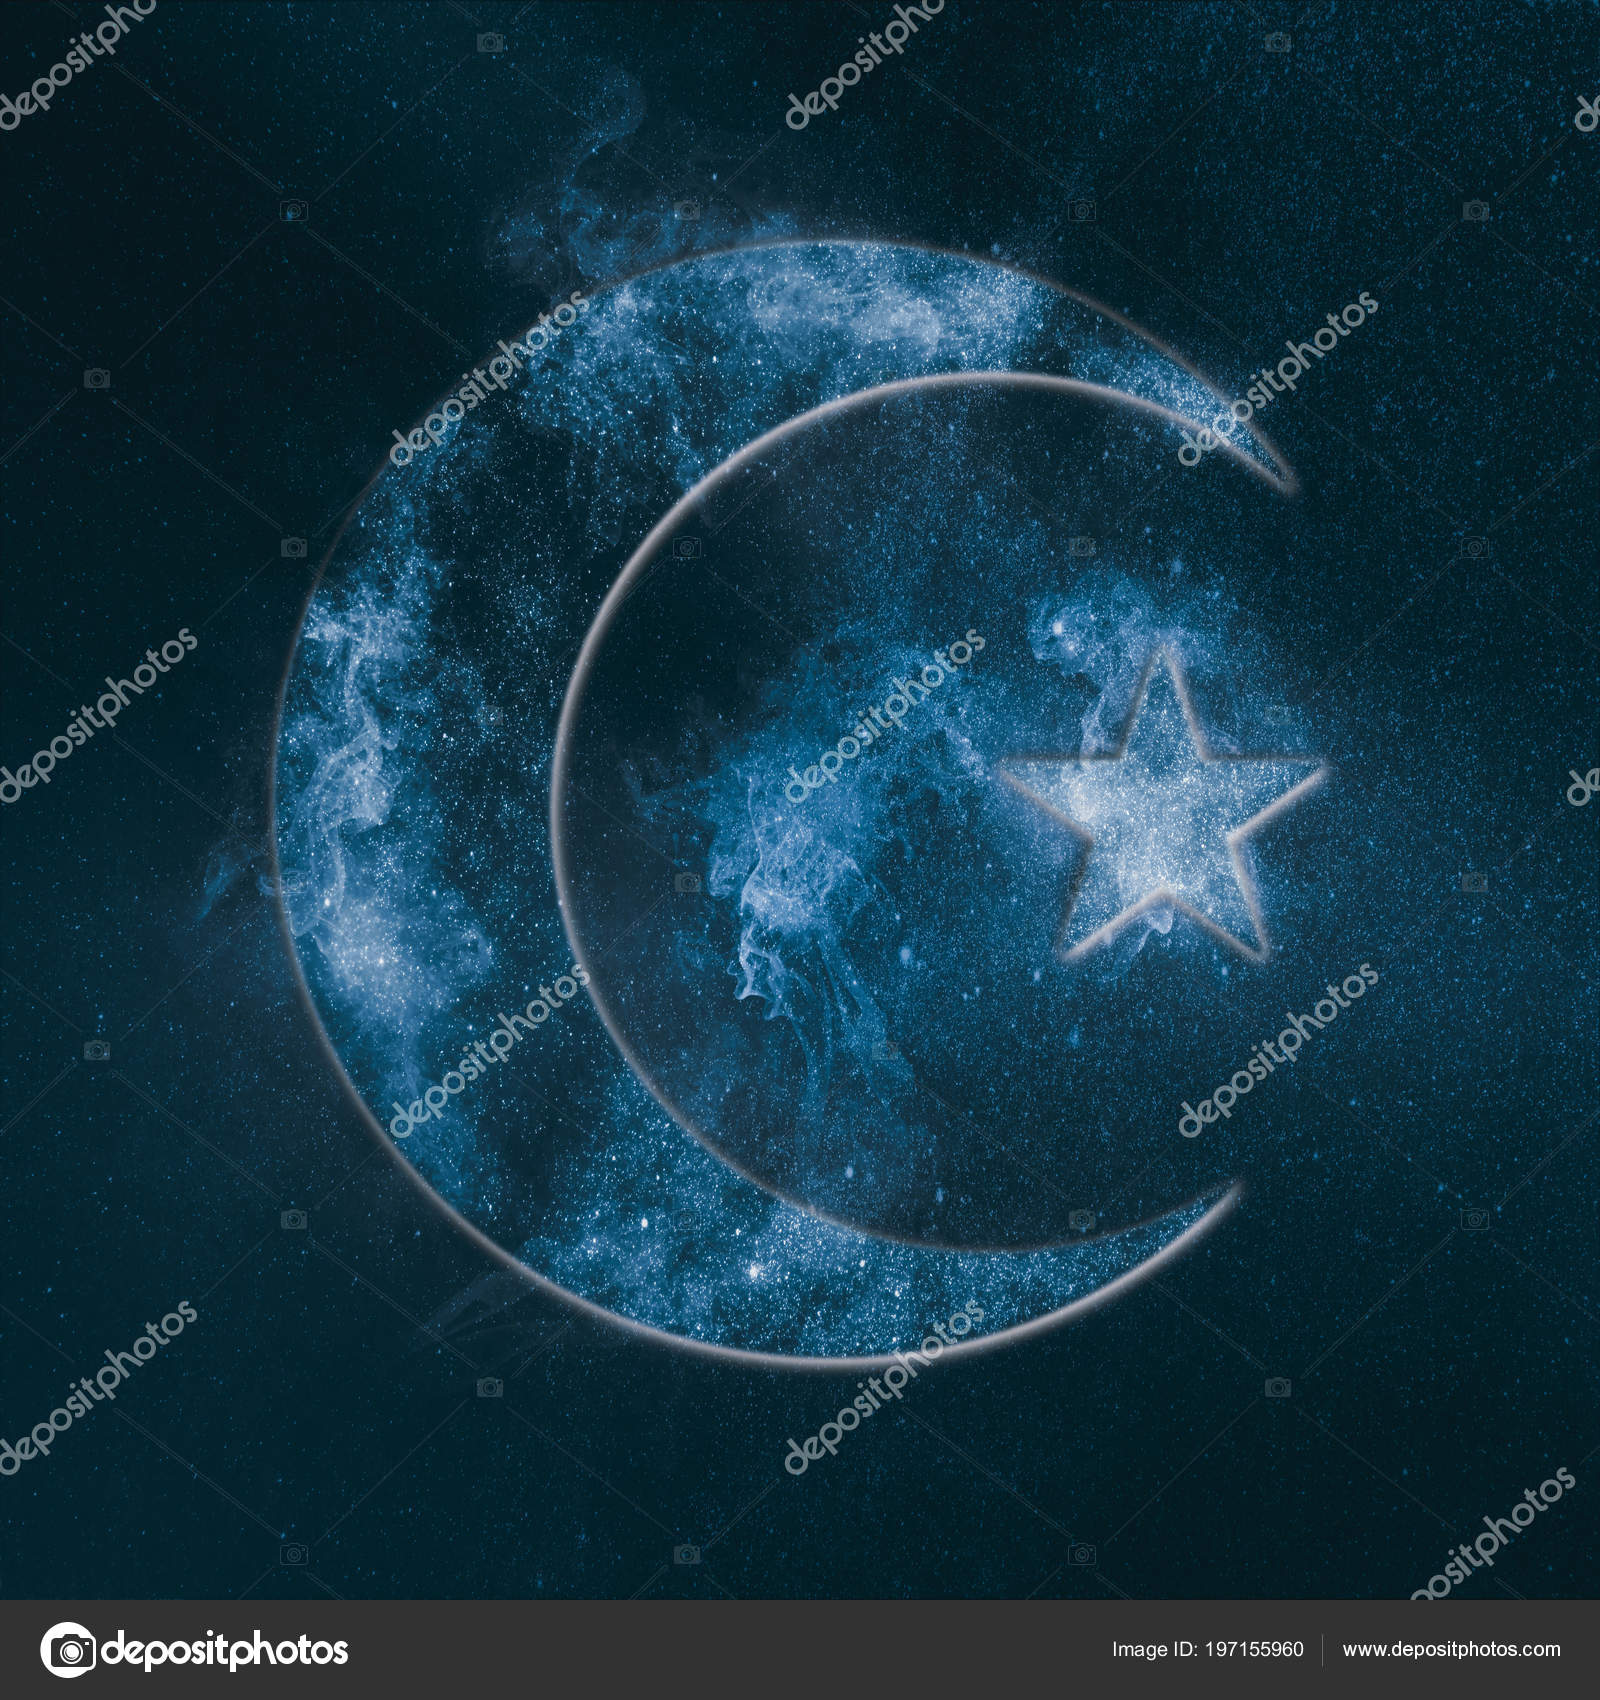 Symbol of Islam. Star and crescent moon. Abstract night sky